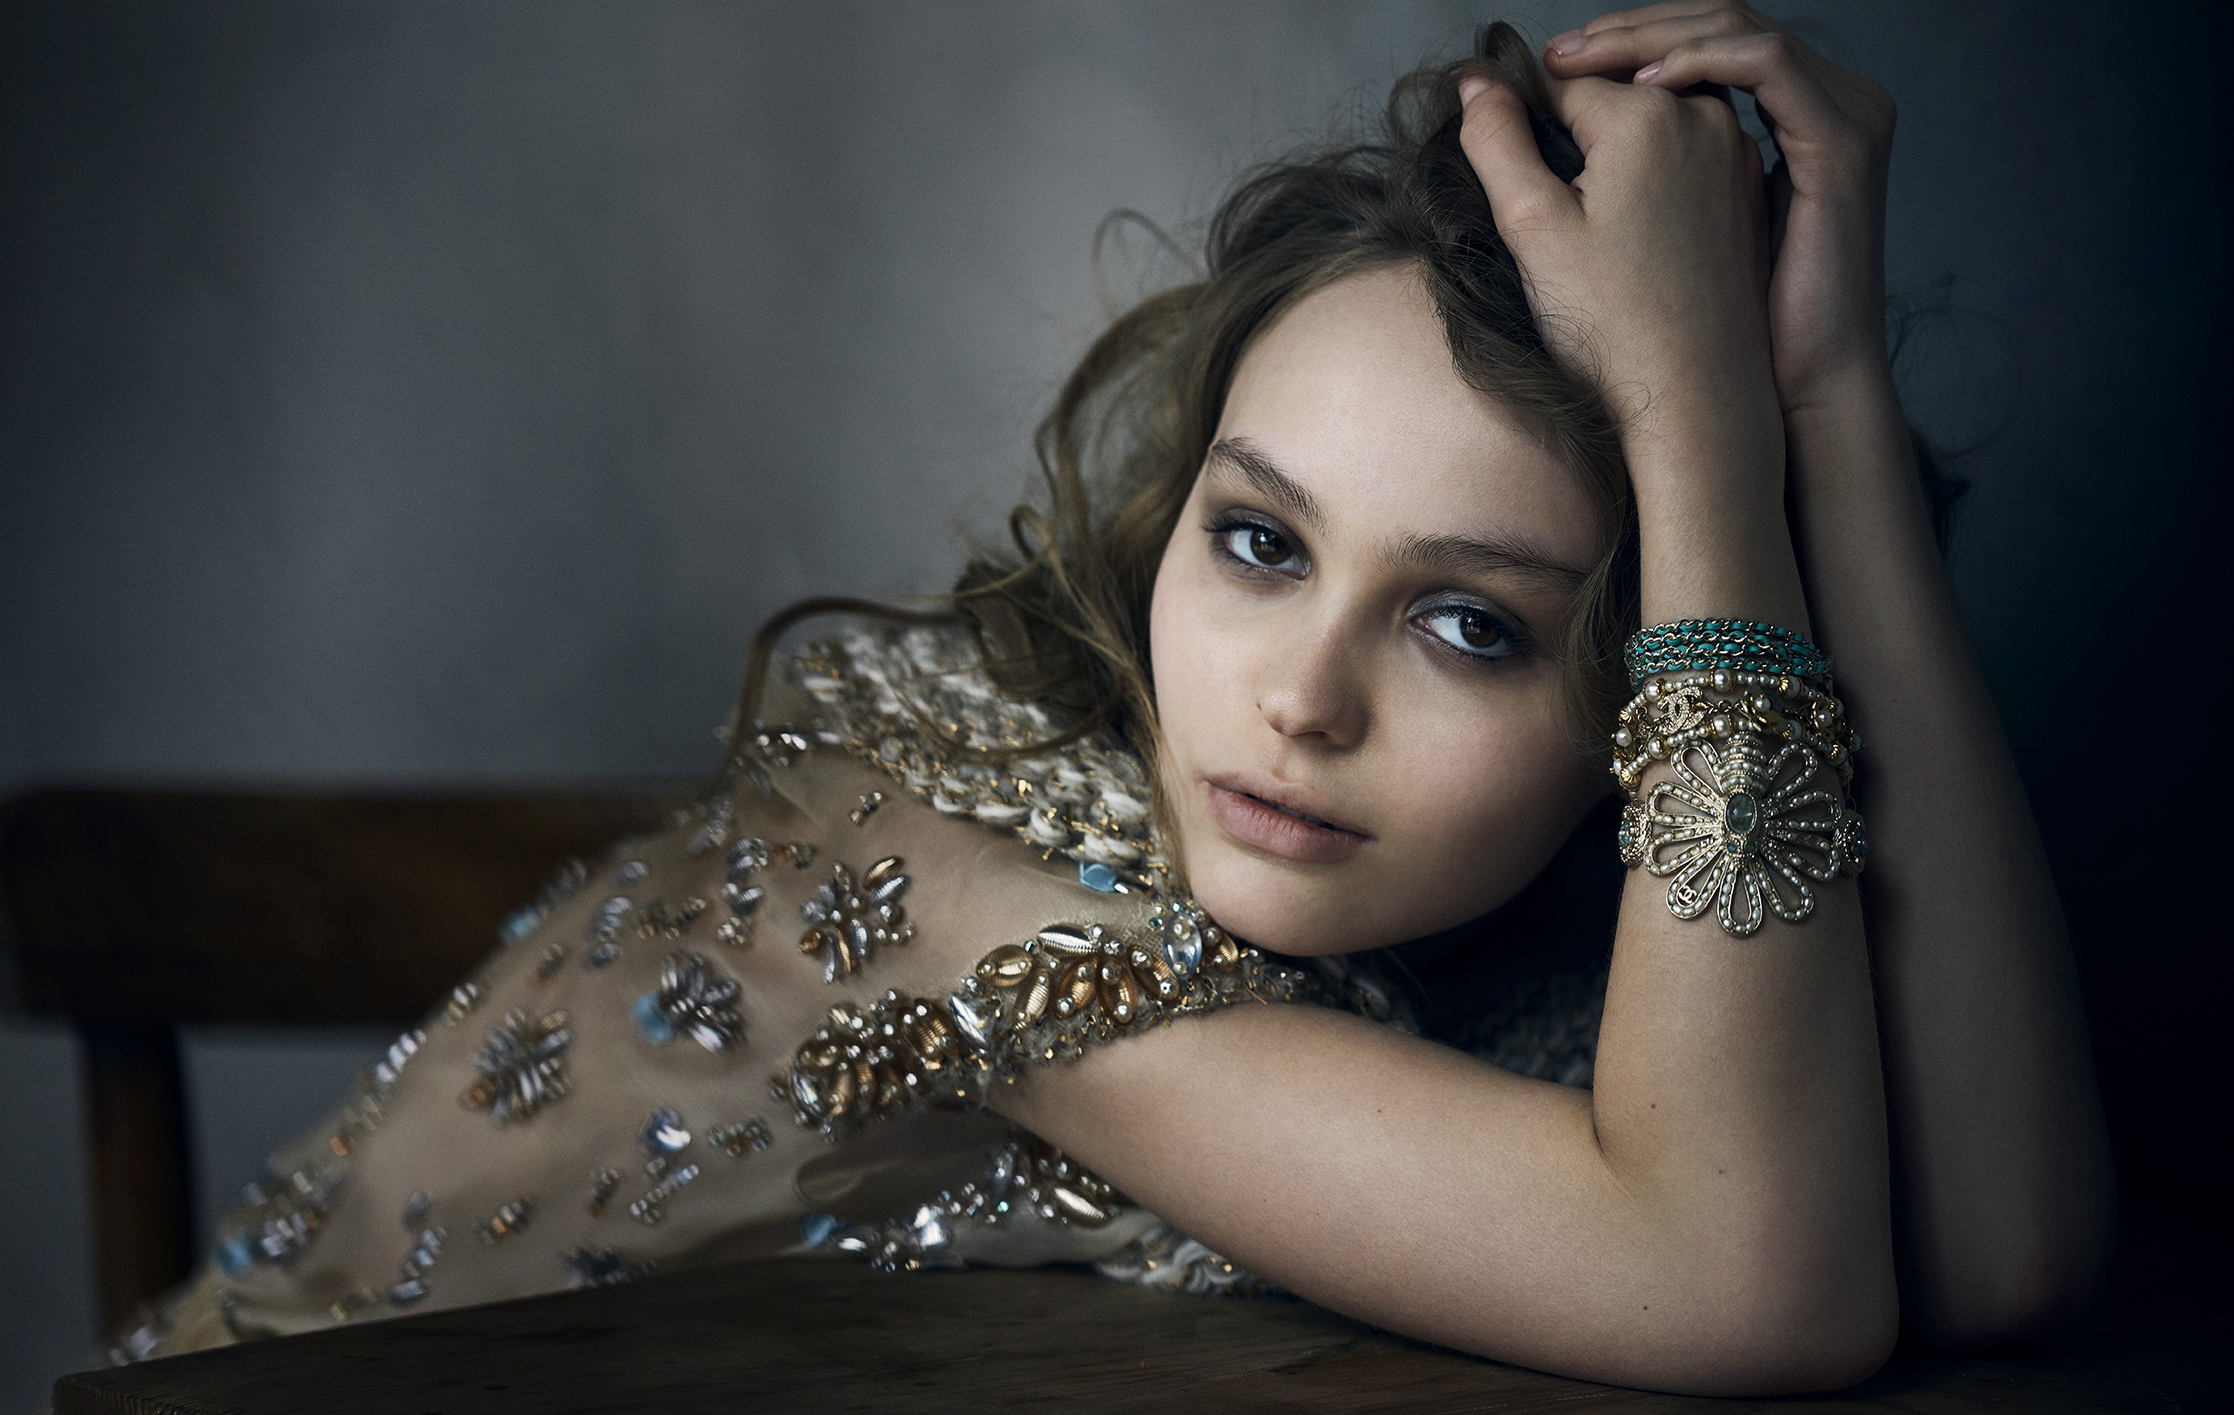 See a Preview of Lily-Rose Depp's Chanel Fragrance Ads - Lily-Rose